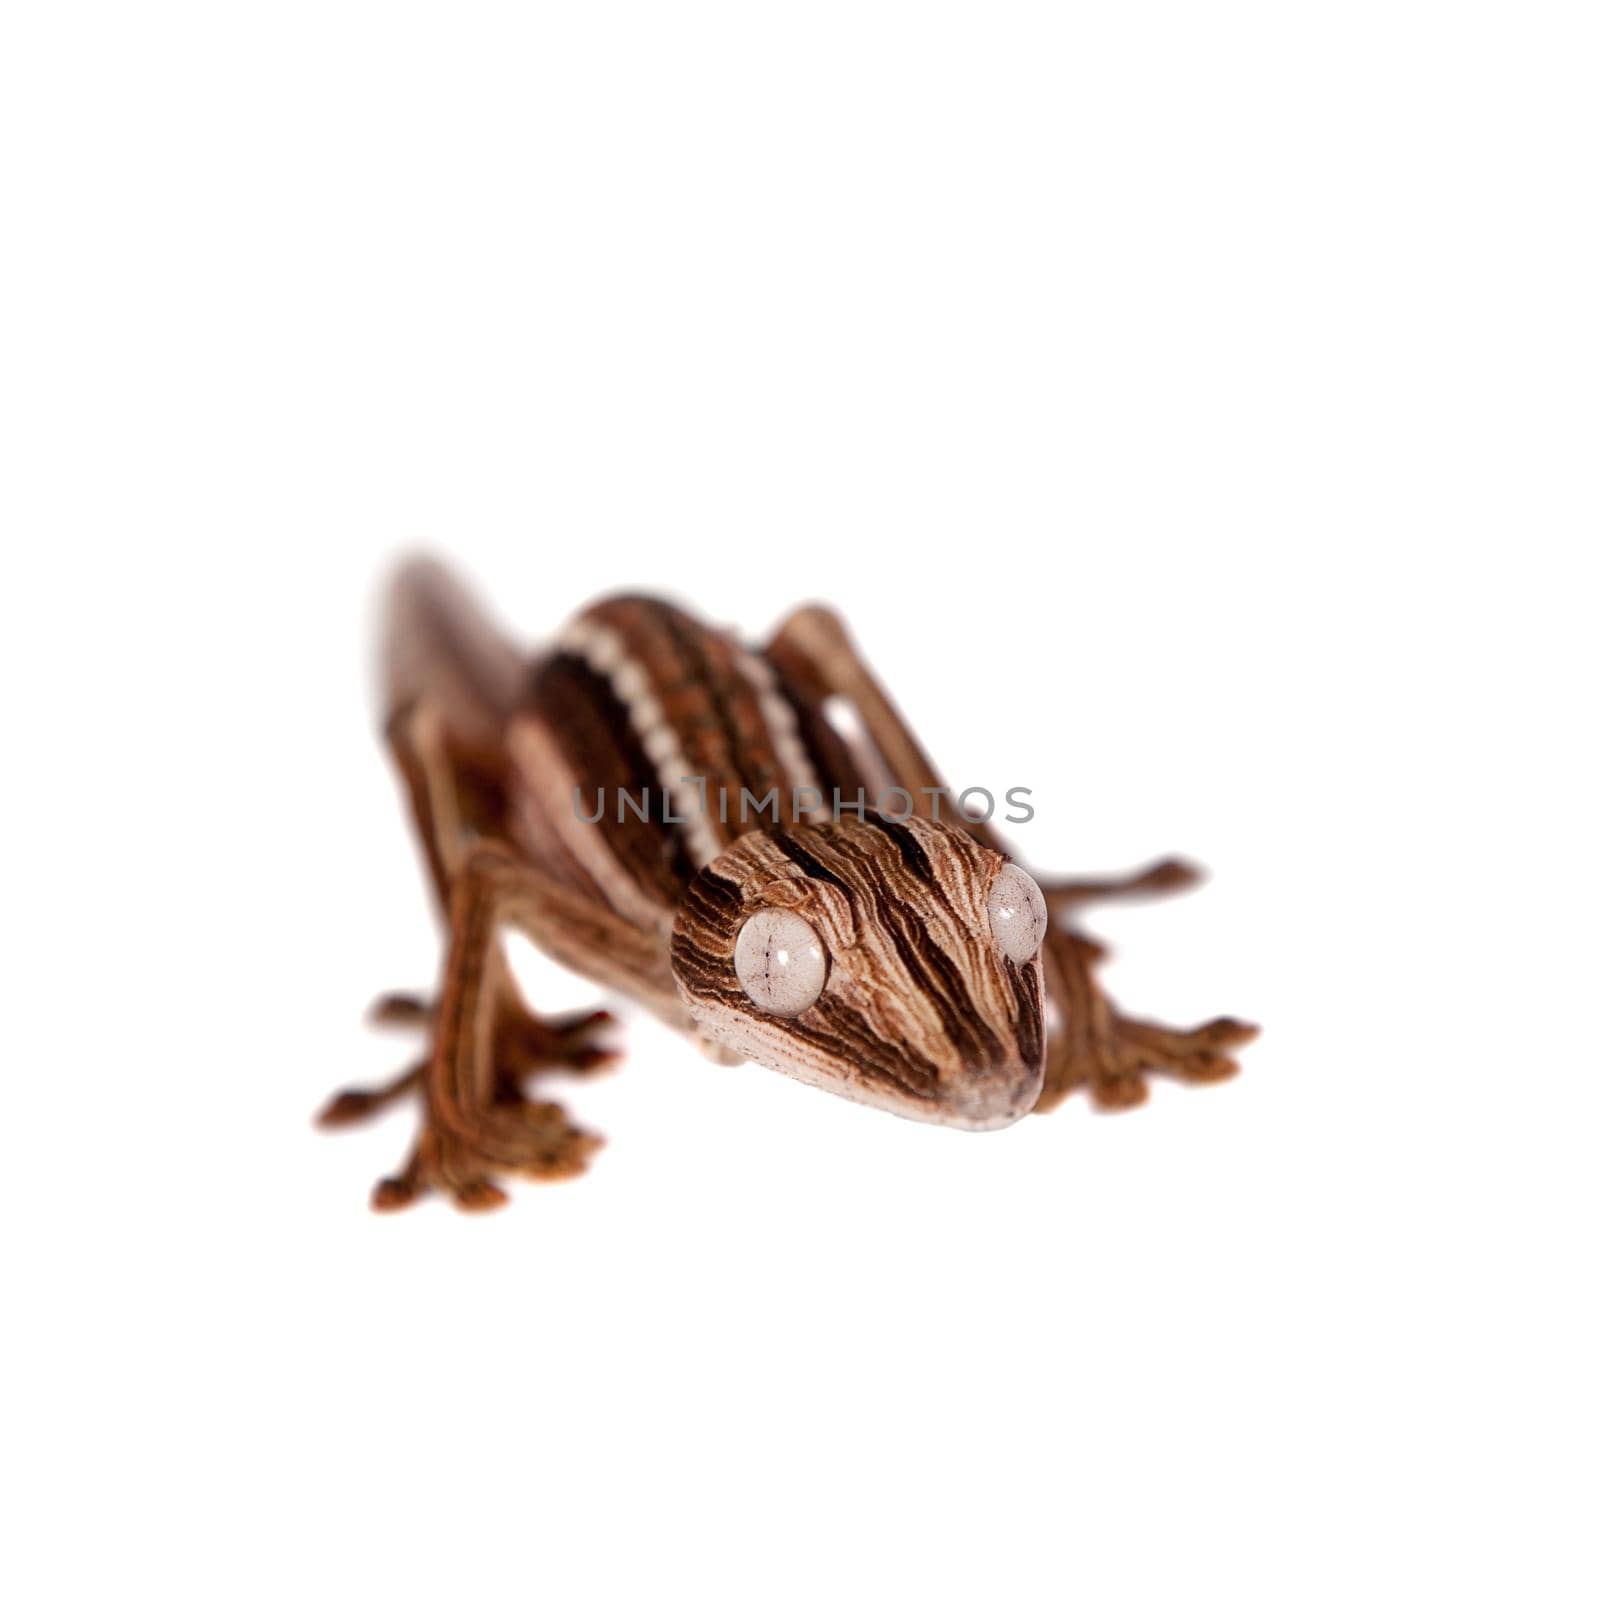 Lined Leaf-tail Gecko, Uroplatus lineatus isolated on white background.